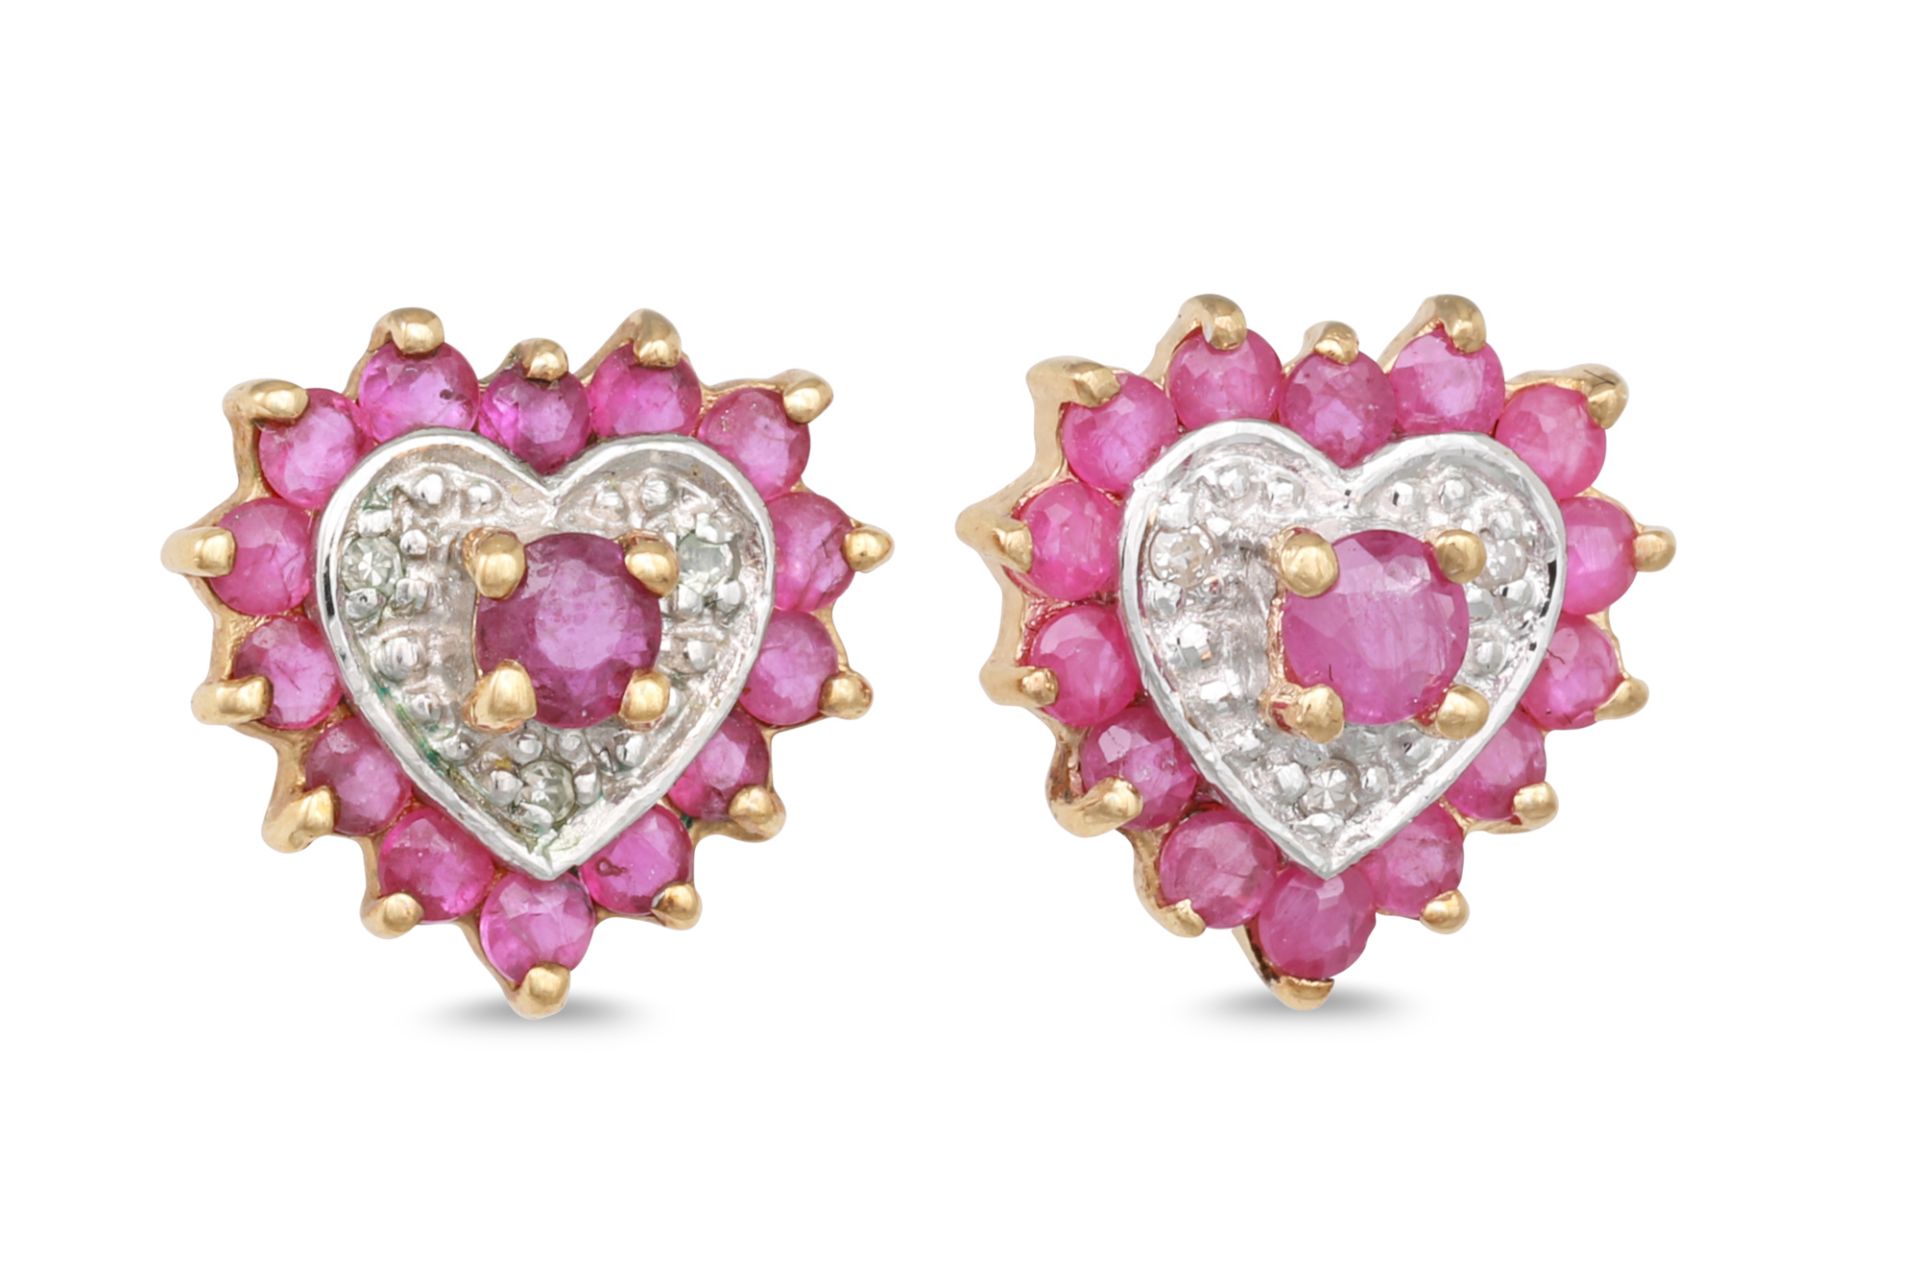 A PAIR OF DIAMOND AND RUBY CLUSTER EARRINGS, heart shaped, mounted in yellow gold